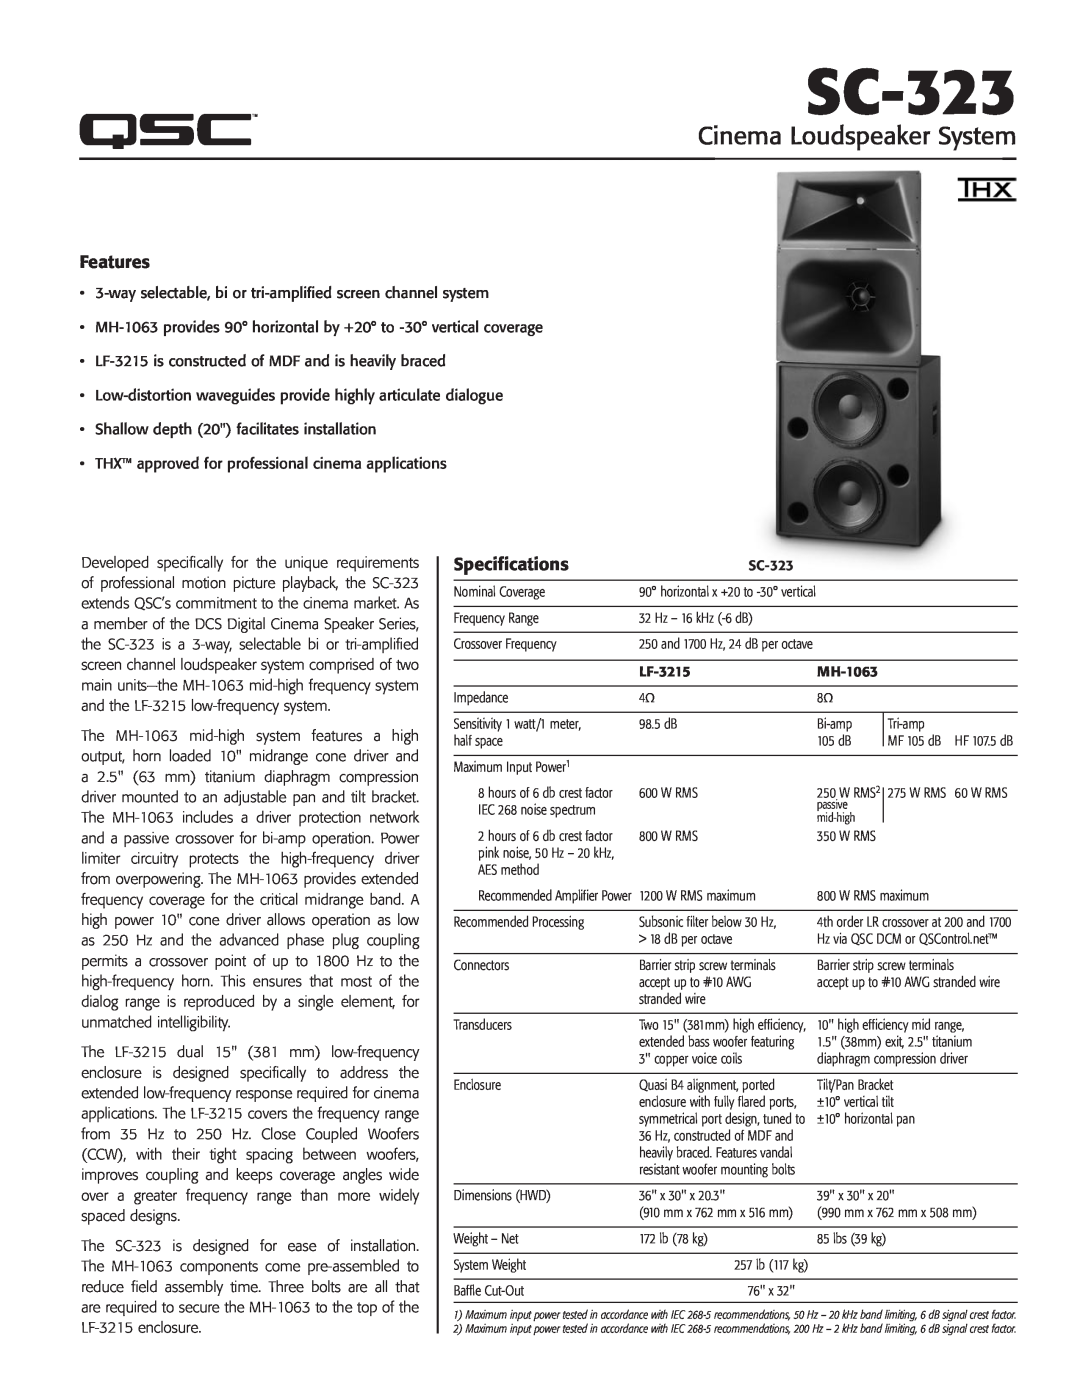 QSC Audio SC-323 specifications Features, Specifications, Cinema Loudspeaker System 